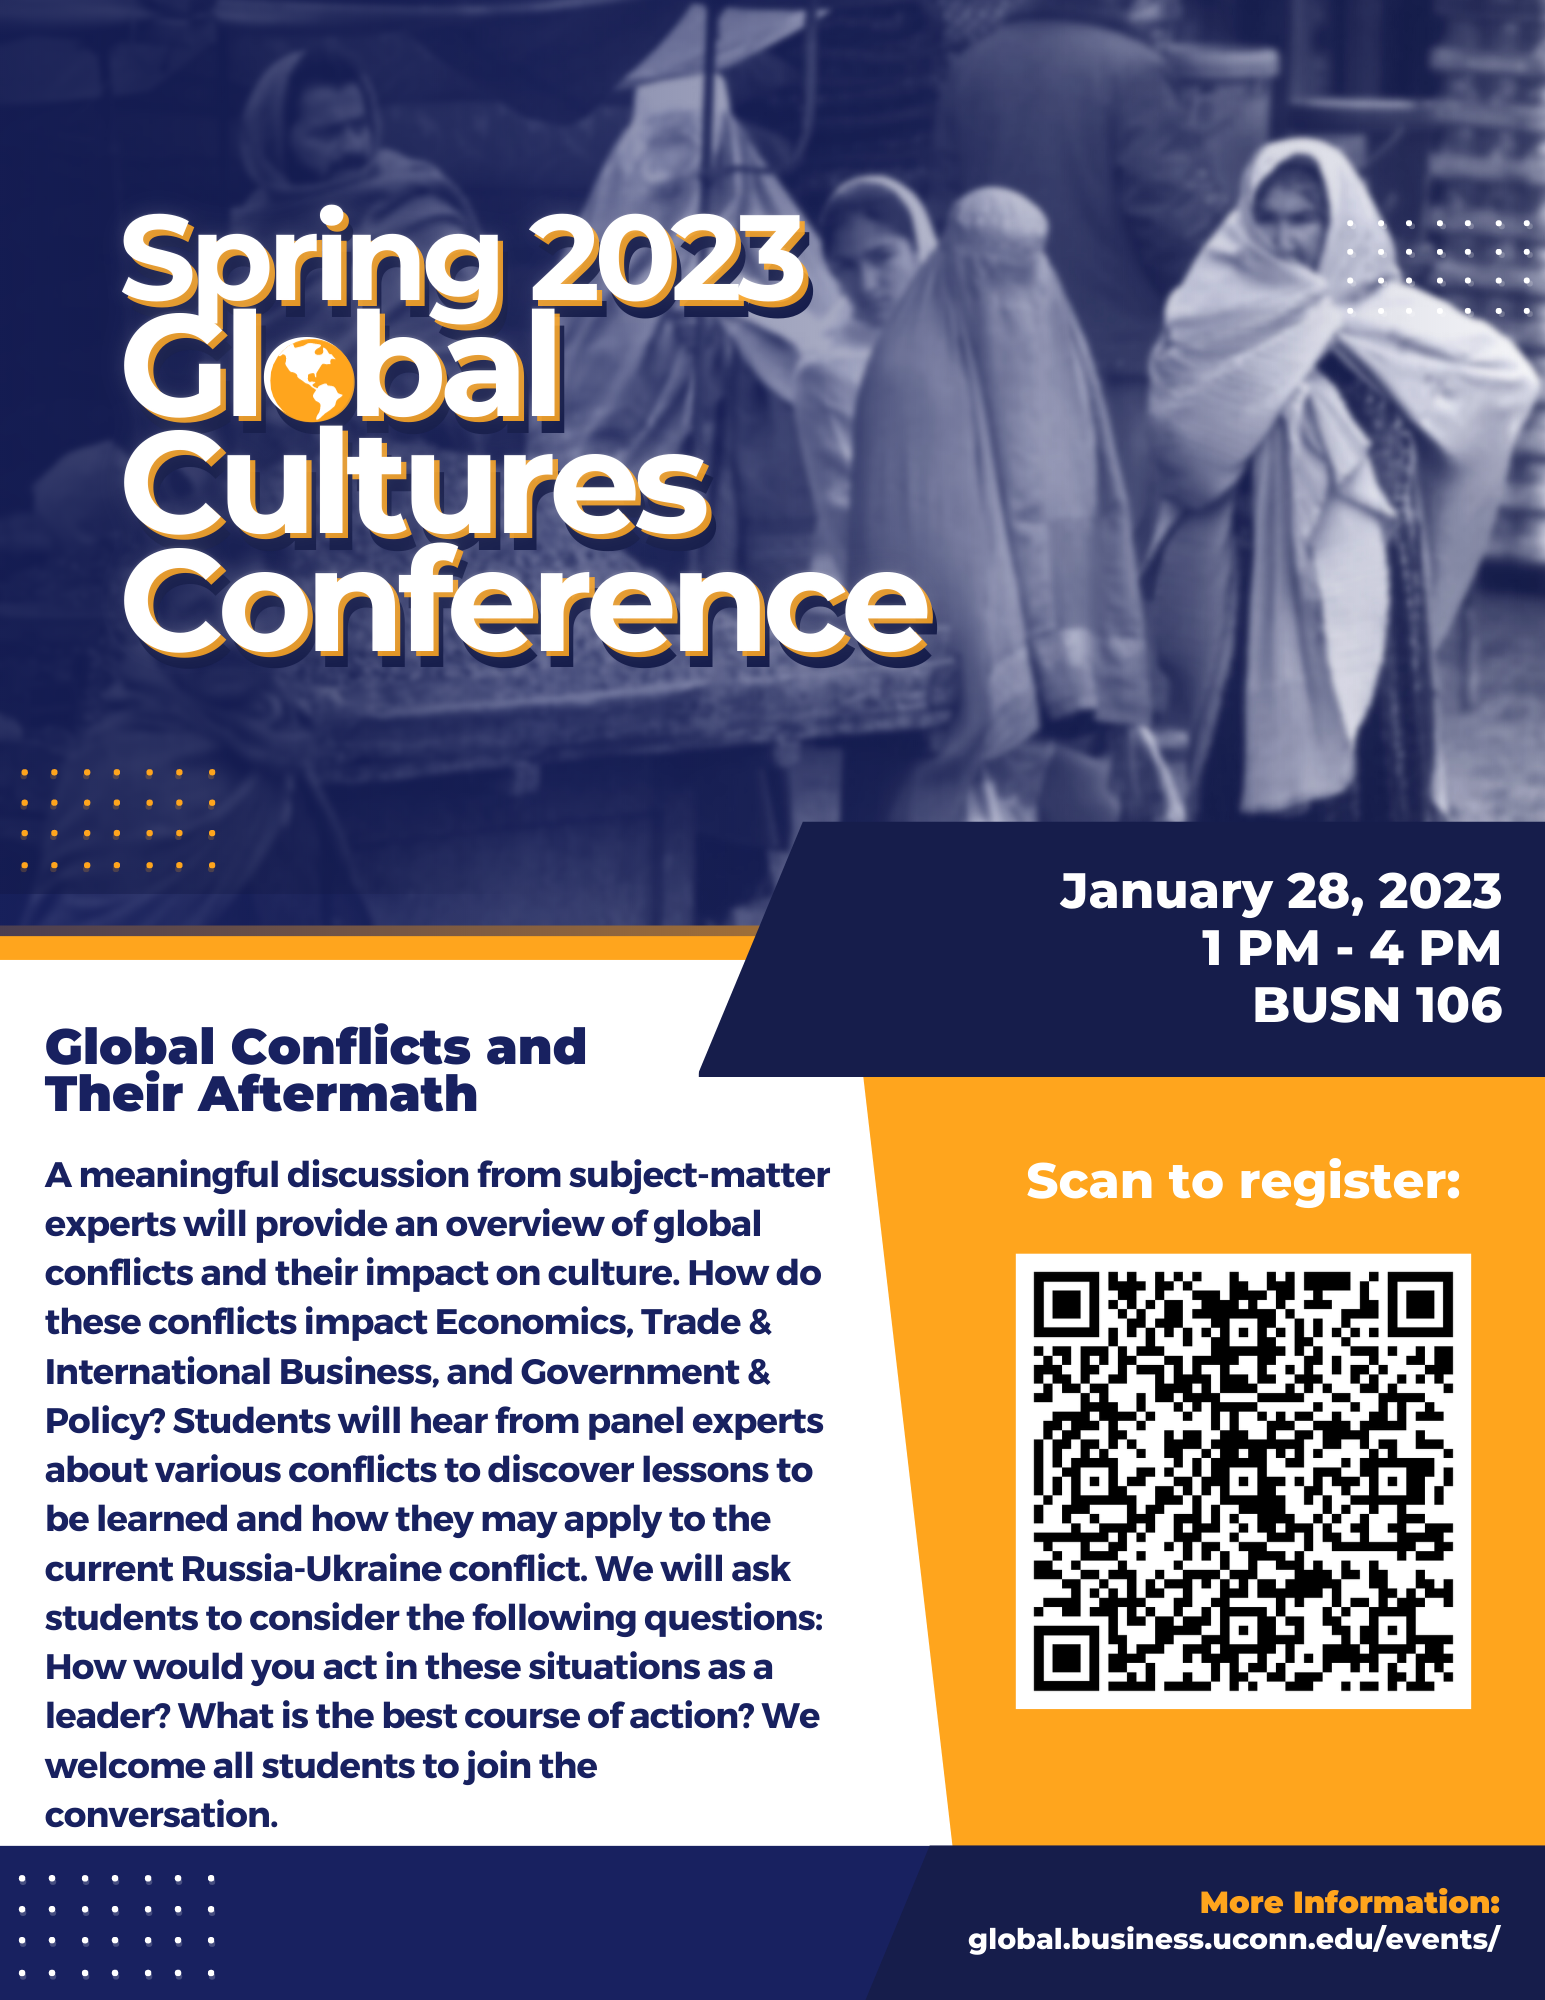 Global Cultures Conference